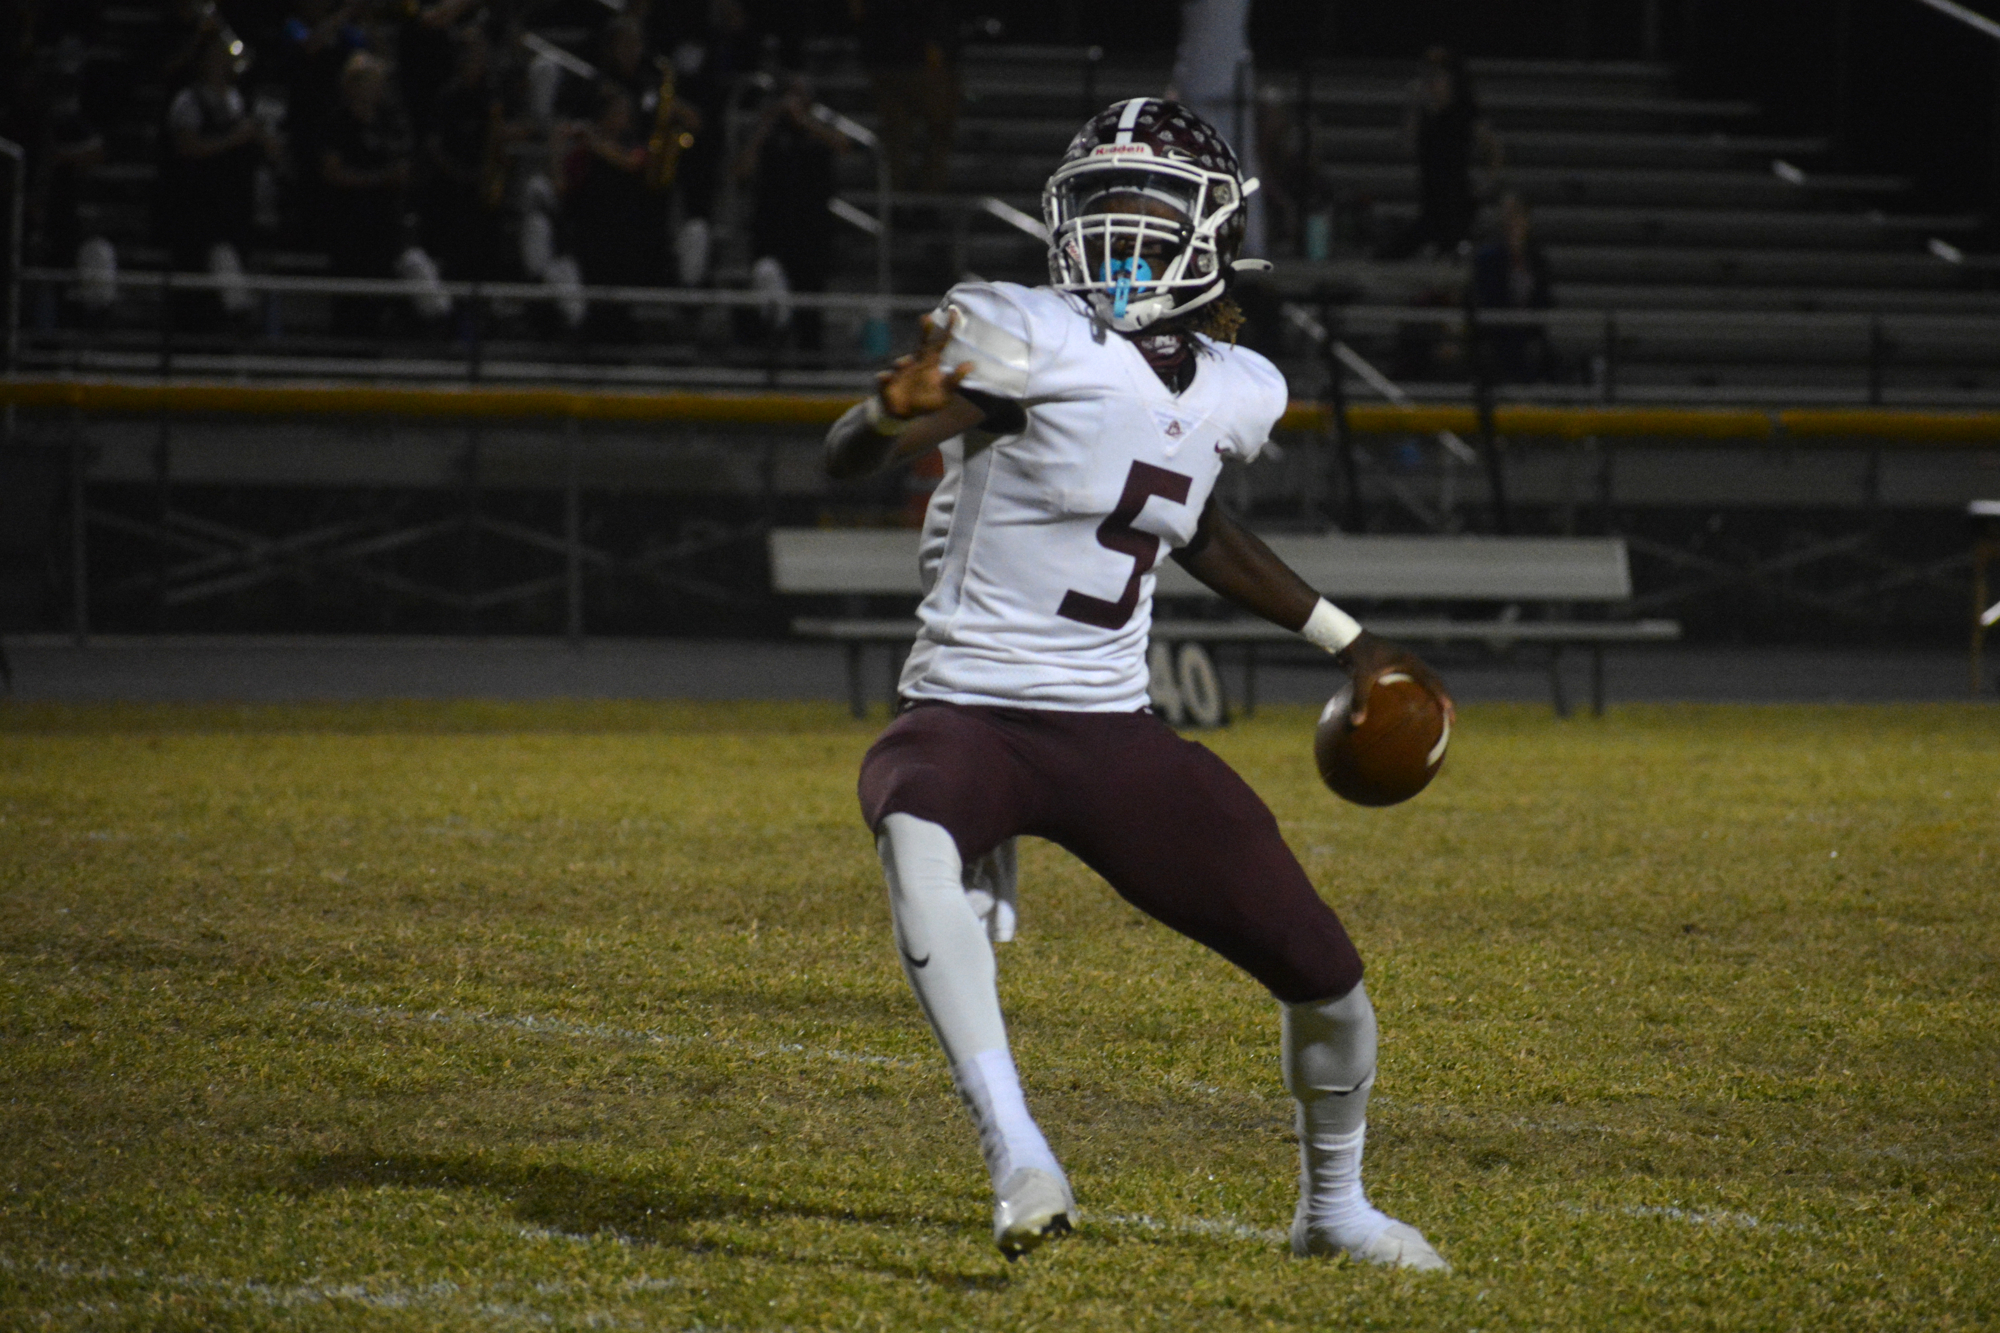 8. Braden River senior Bryan Kearse threw two touchdowns in the Pirates' 30-16 win over Countryside High.